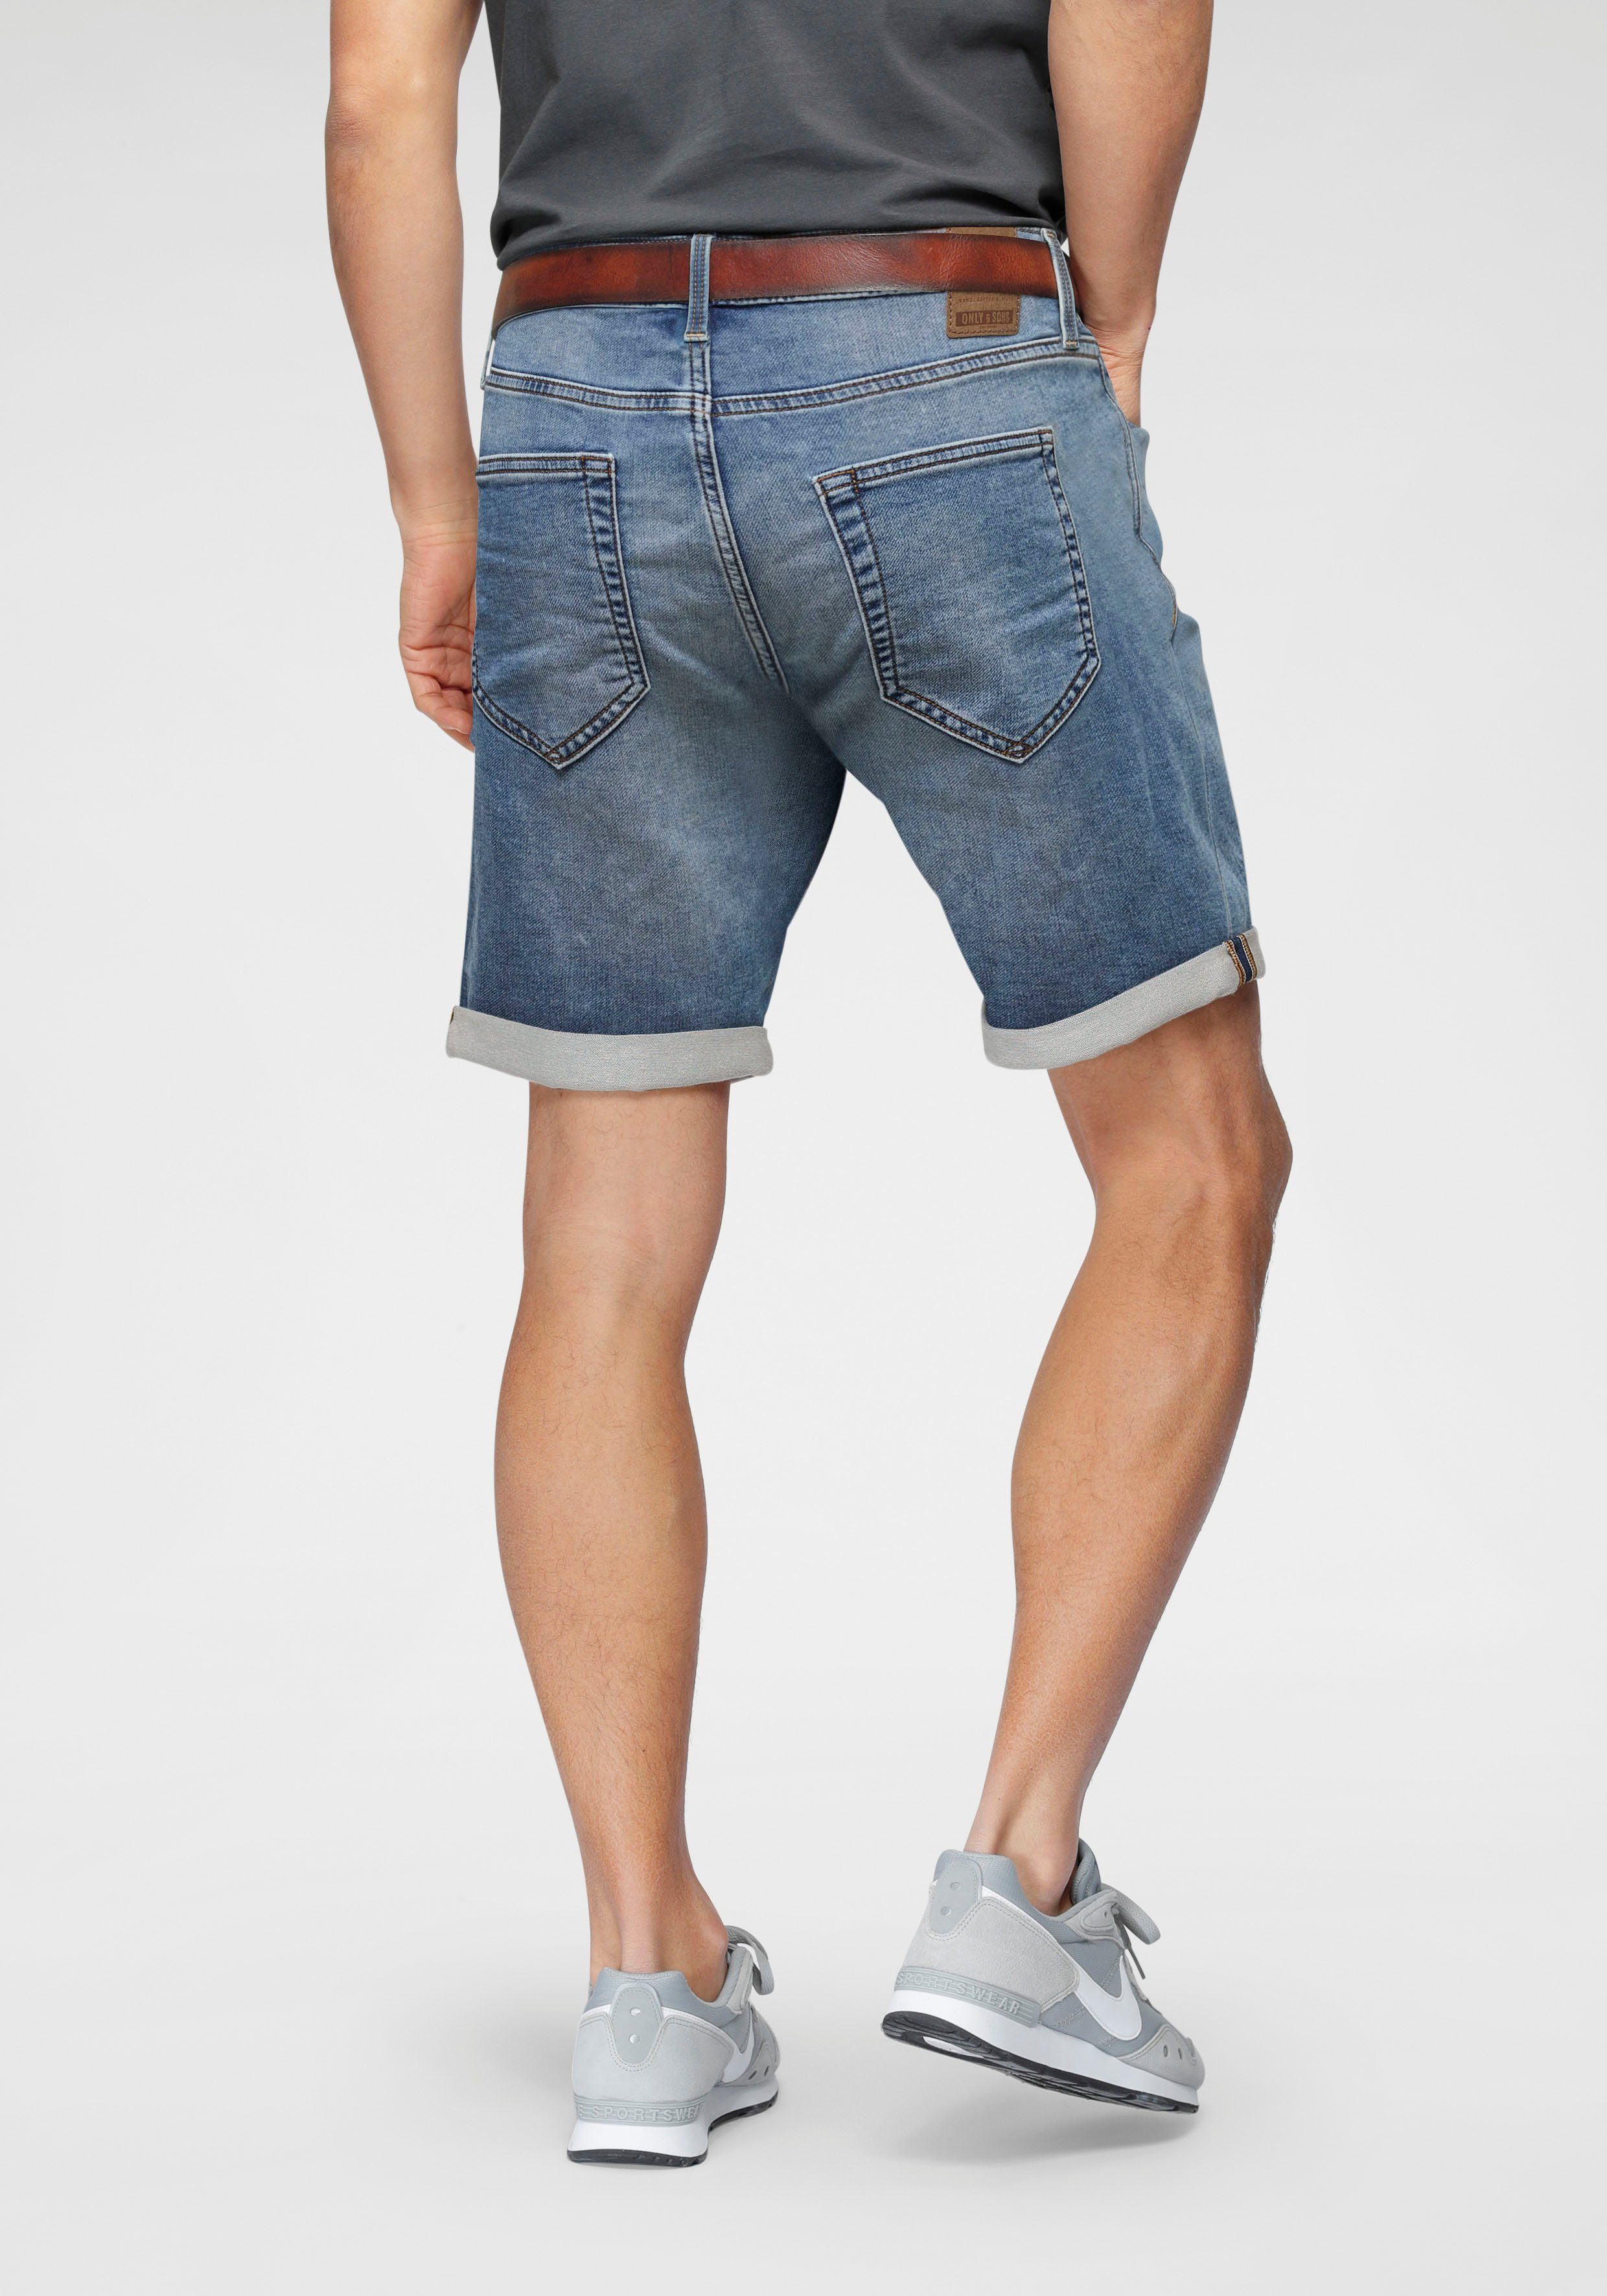 ONSPLY & Jeansshorts 5189 denim LIGHT Blue DNM SHORTS SONS NOOS BLUE ONLY